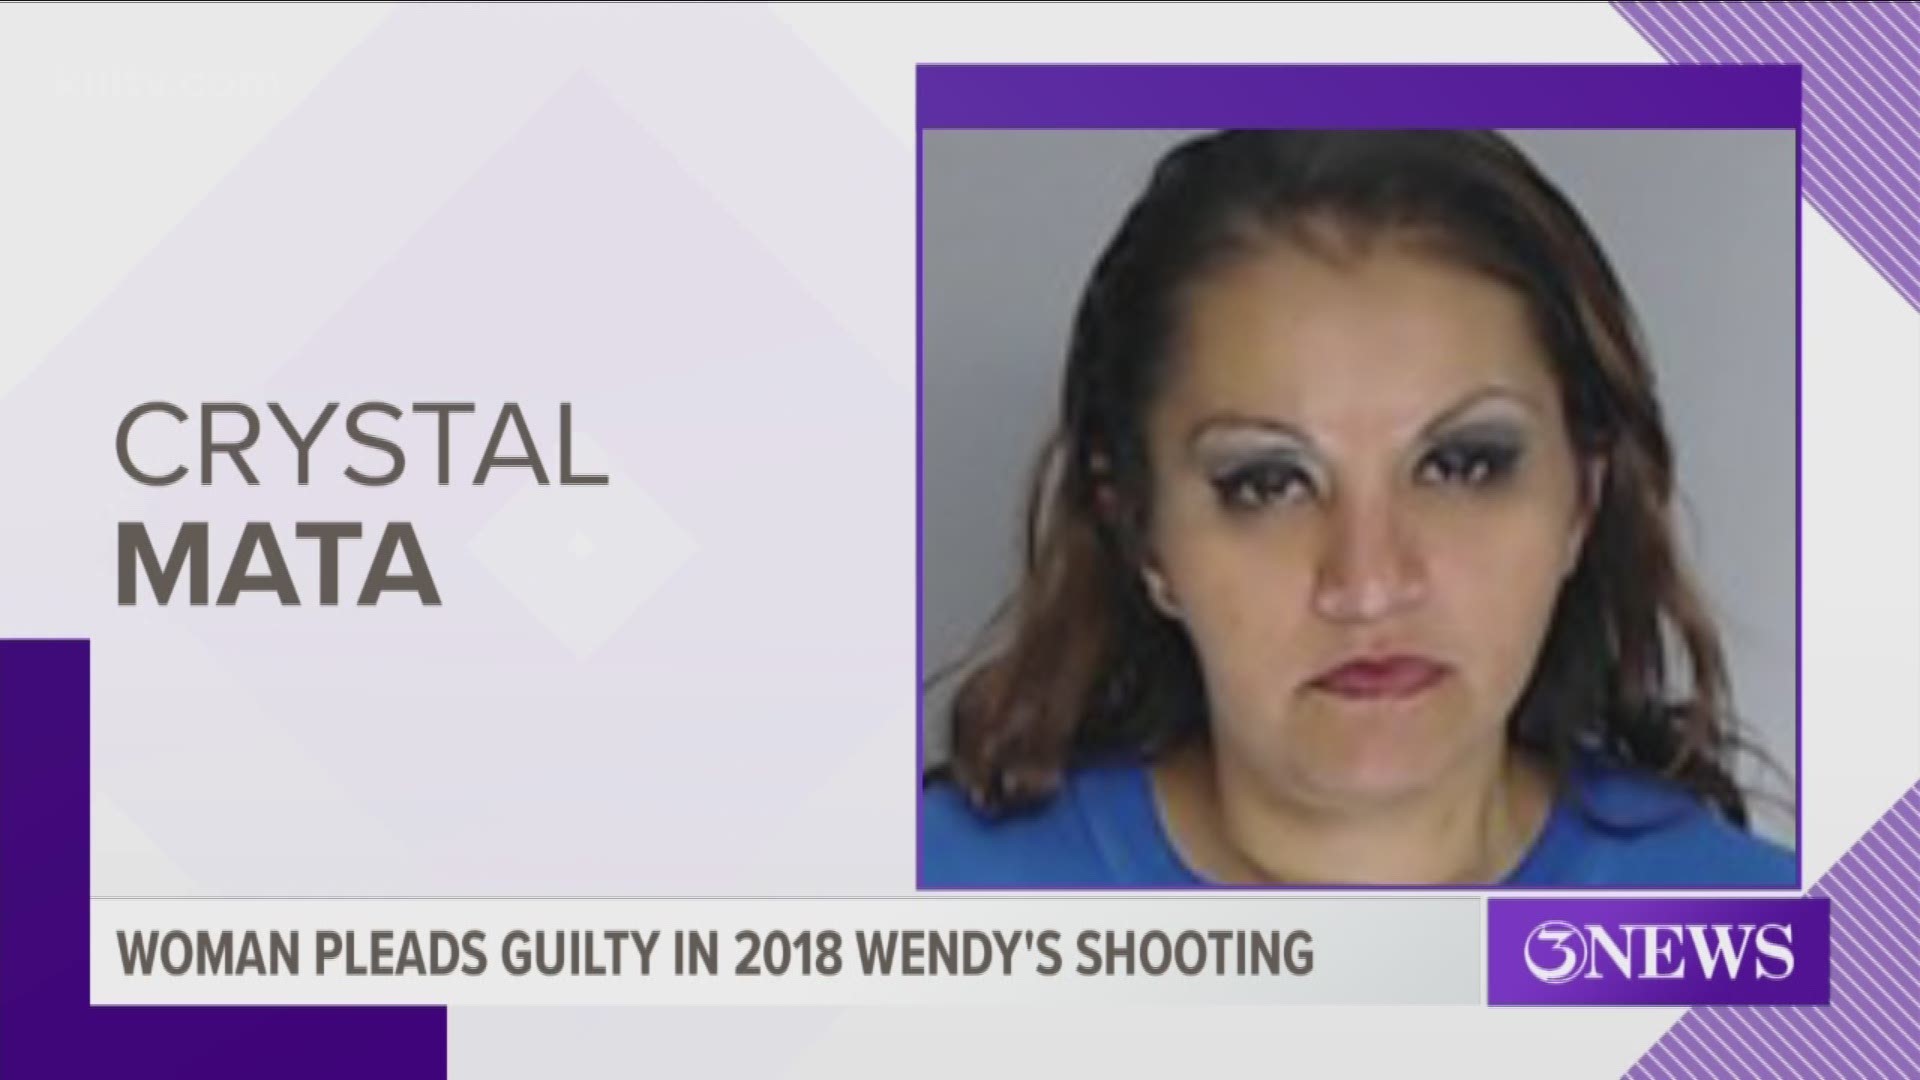 A woman has pleaded guilty in the murder of another woman at a fast food restaurant in Corpus Christi last year.